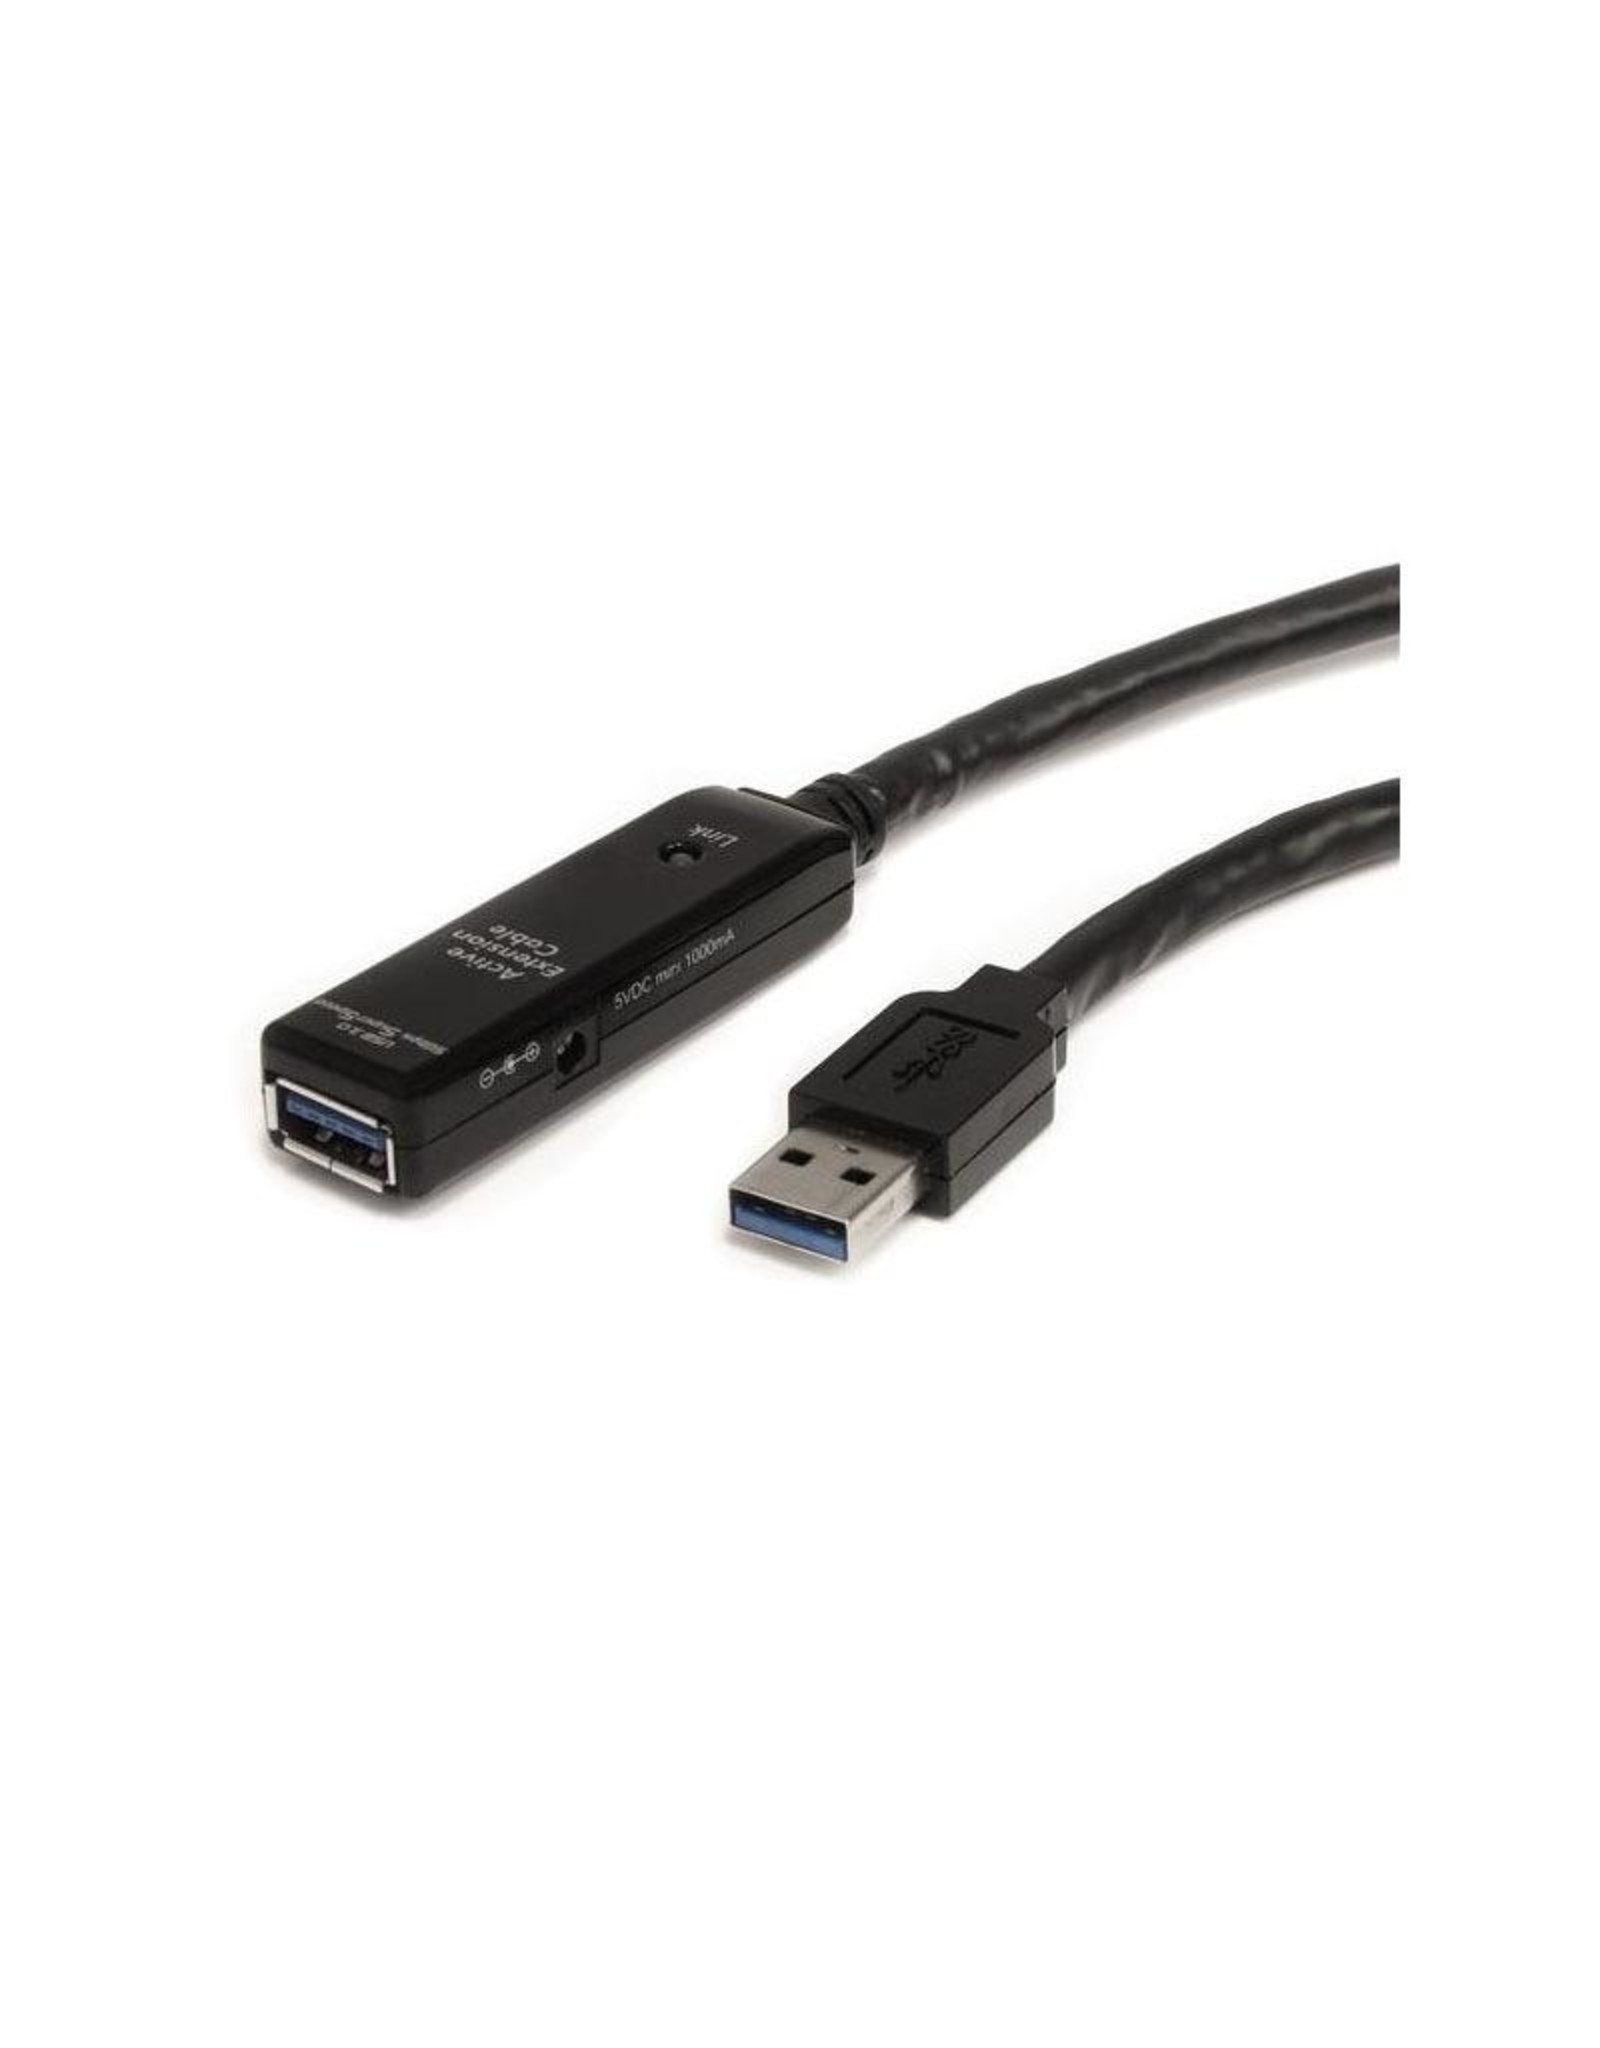 Startech USB 3.0 powered repeater extension cable, 10m